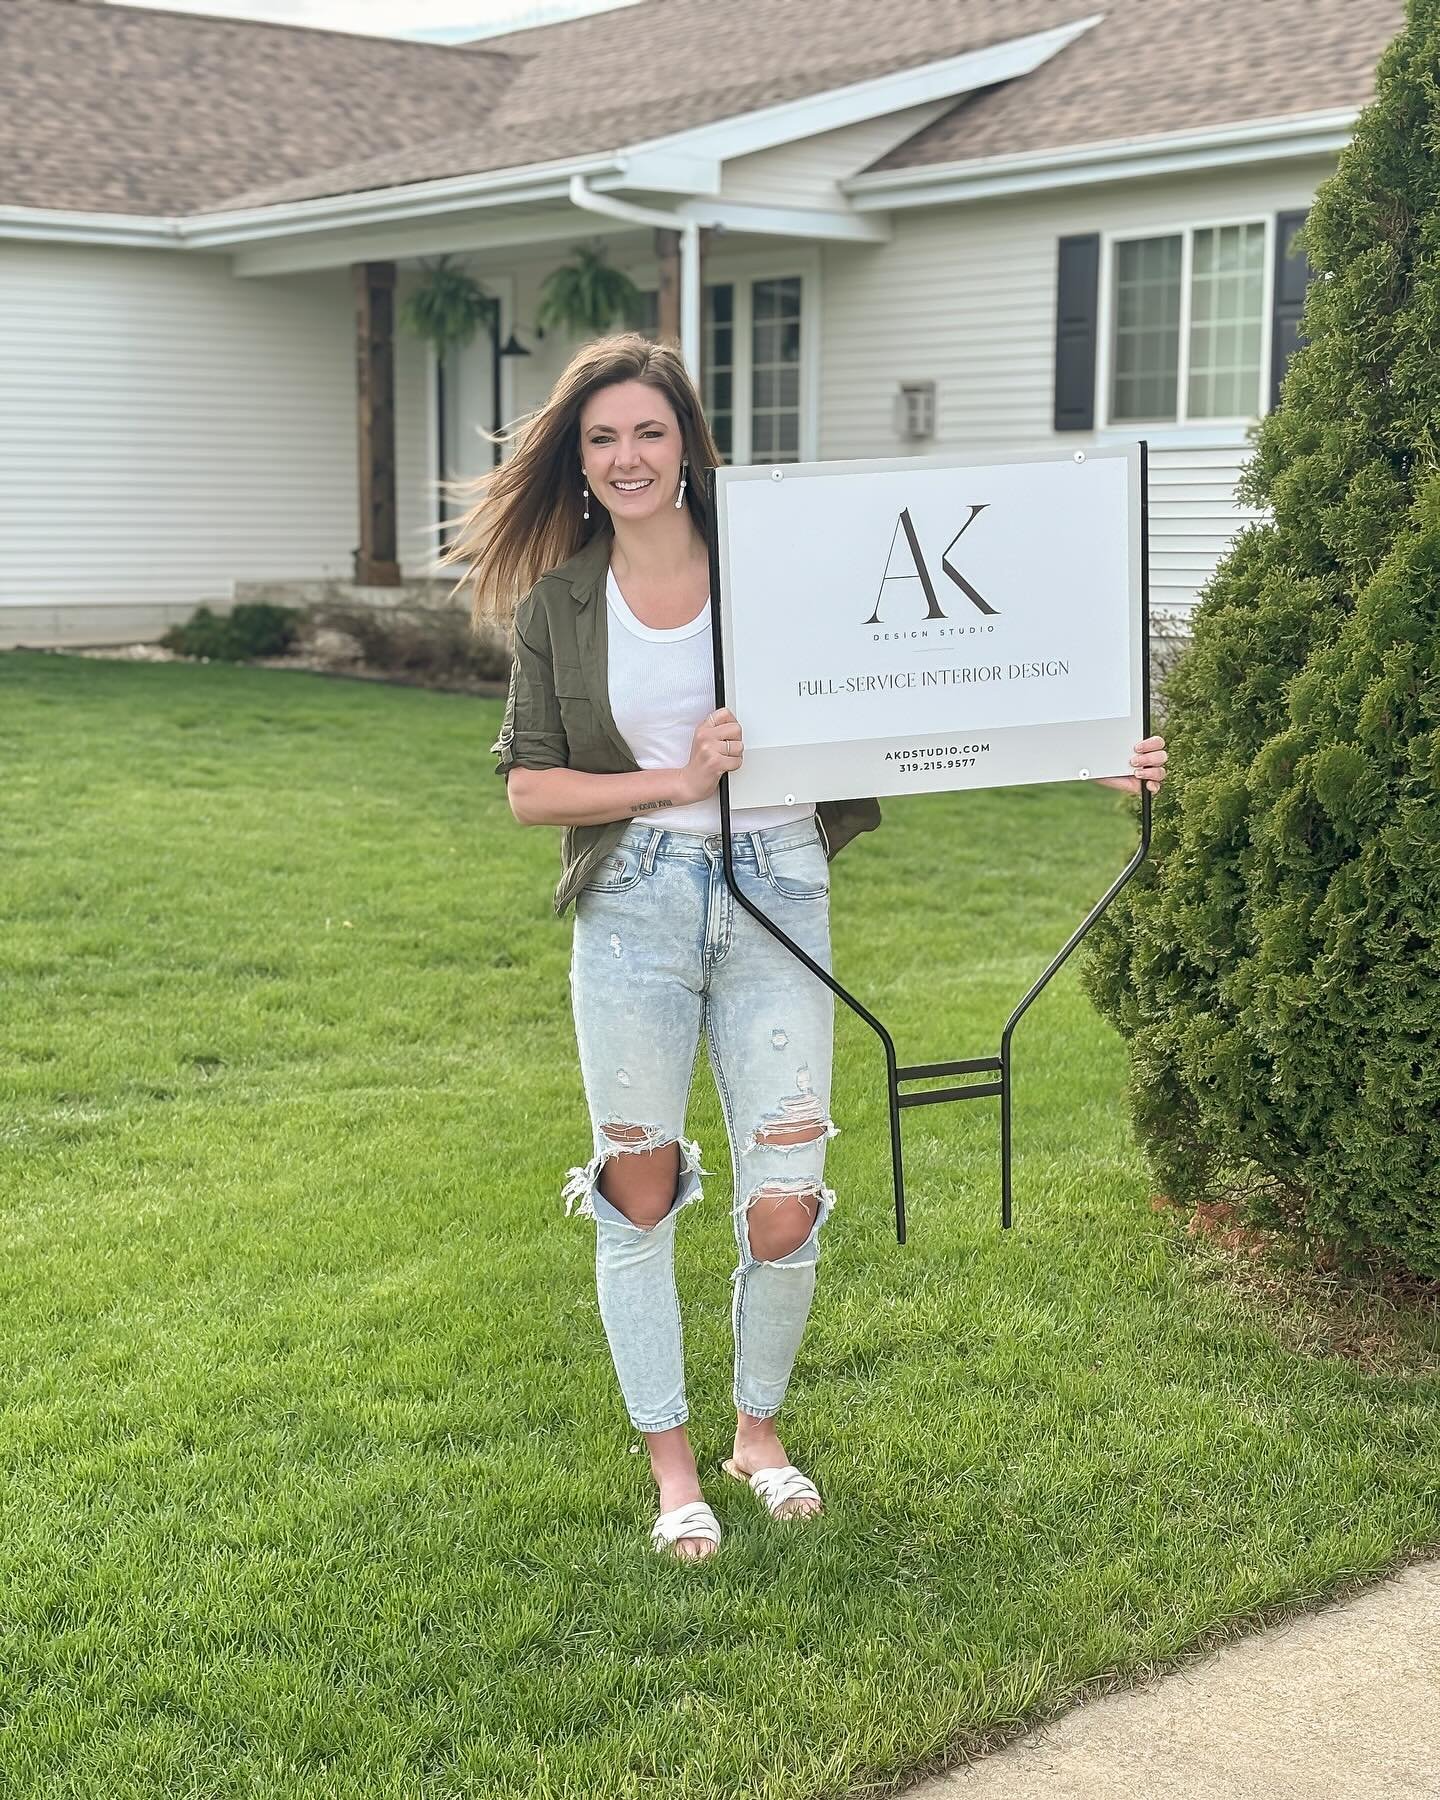 Are you ready for it? AK Design Studio signs are making their debut in yards near you! Feeling incredibly grateful for projects spanning not only the Cedar Valley but also reaching across Iowa and even into Minnesota. Keep your eyes peeled &mdash; yo